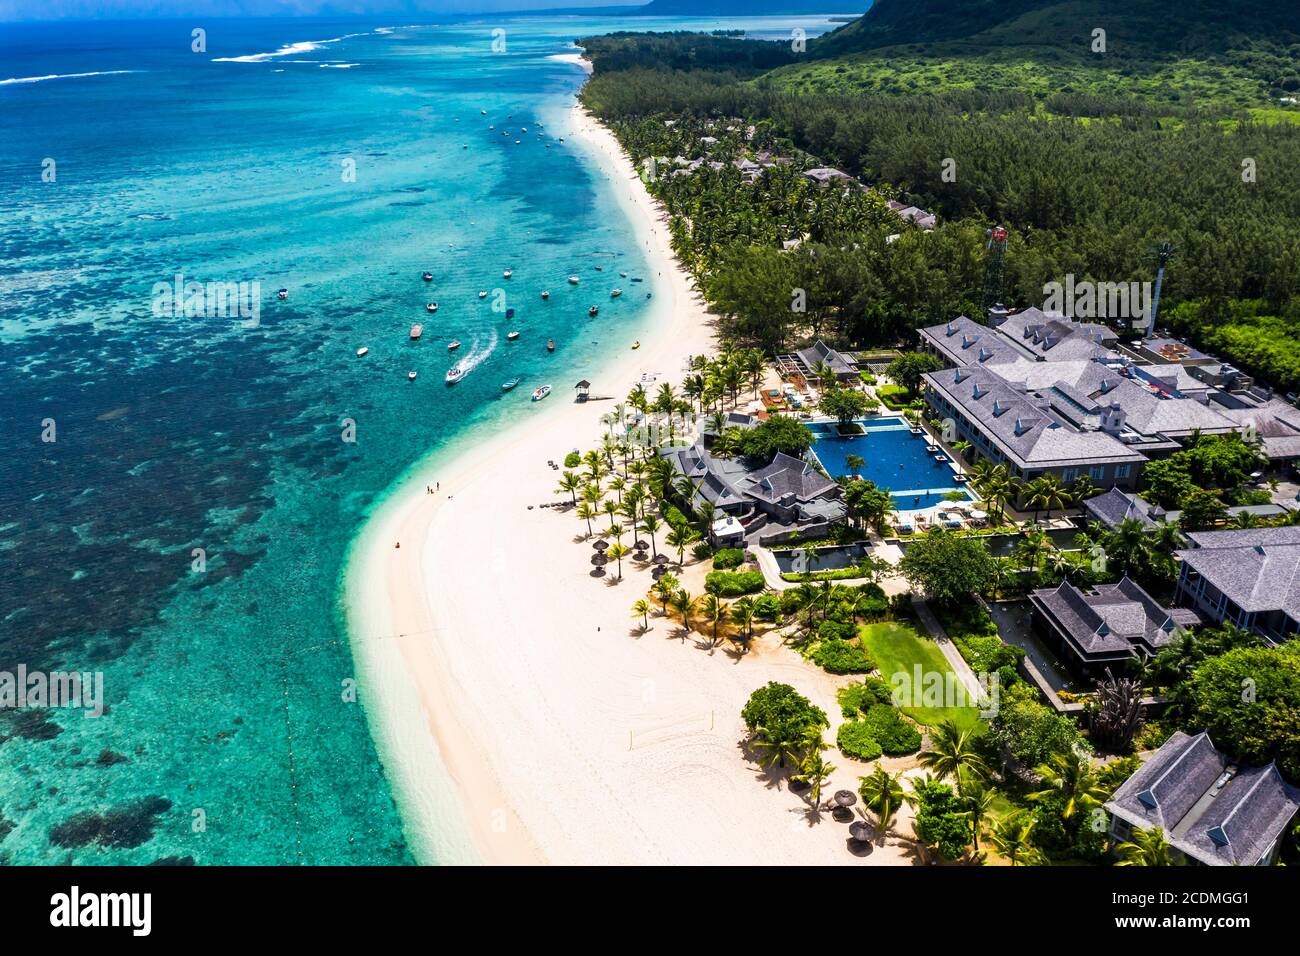 Aerial view, Berg le Morne, with luxury hotel LUX Le Morne Resort, Mauritius, Africa Stock Photo